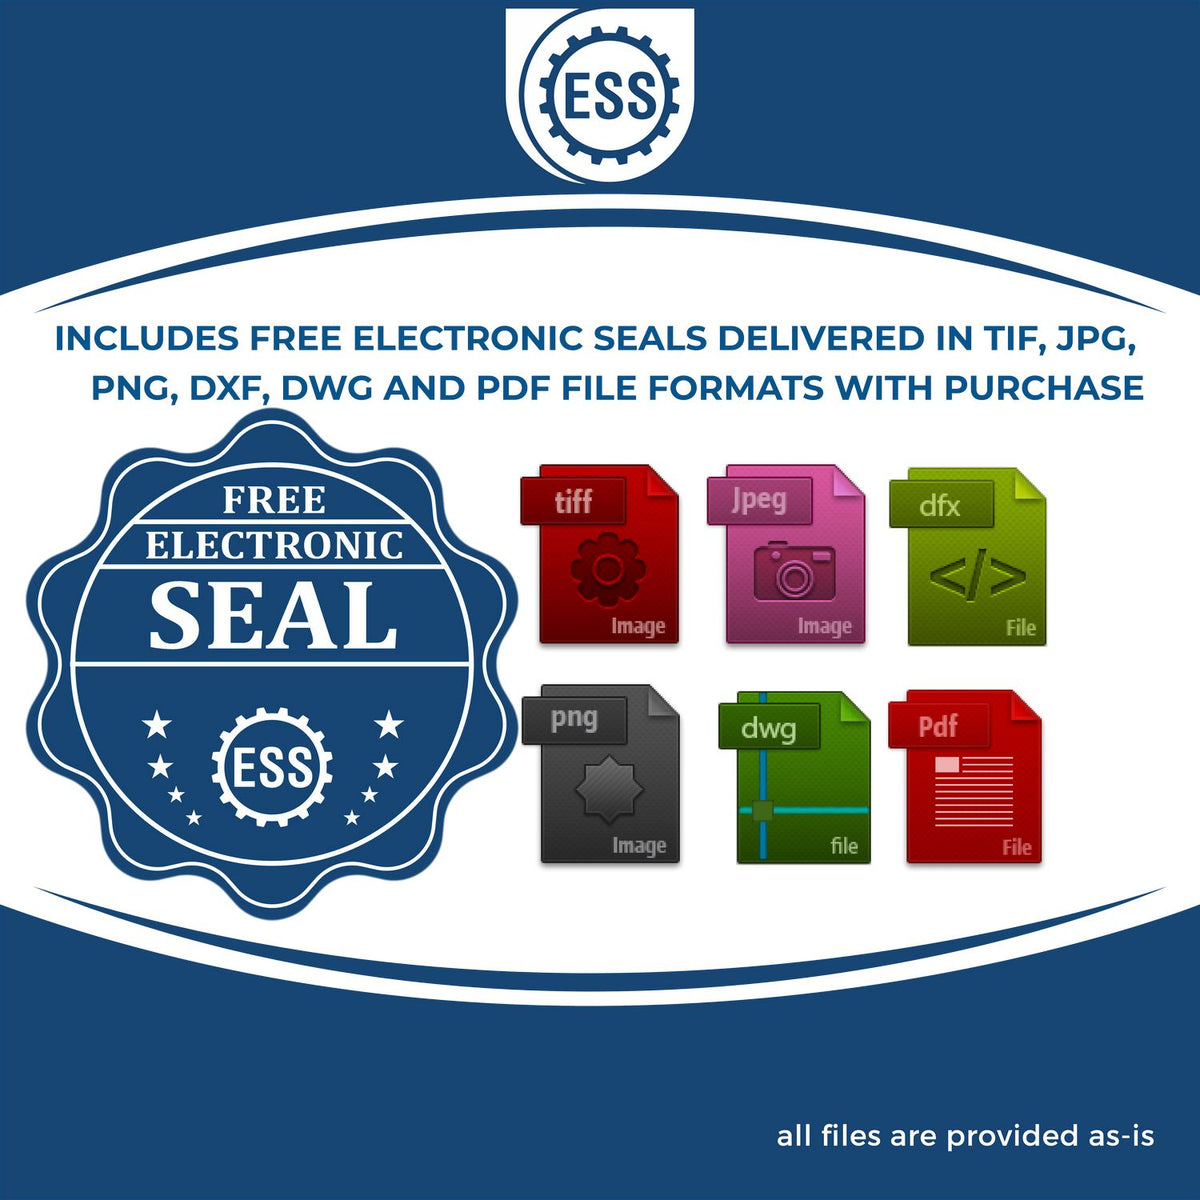 An infographic for the free electronic seal for the Premium MaxLight Pre-Inked New York Engineering Stamp illustrating the different file type icons such as DXF, DWG, TIF, JPG and PNG.